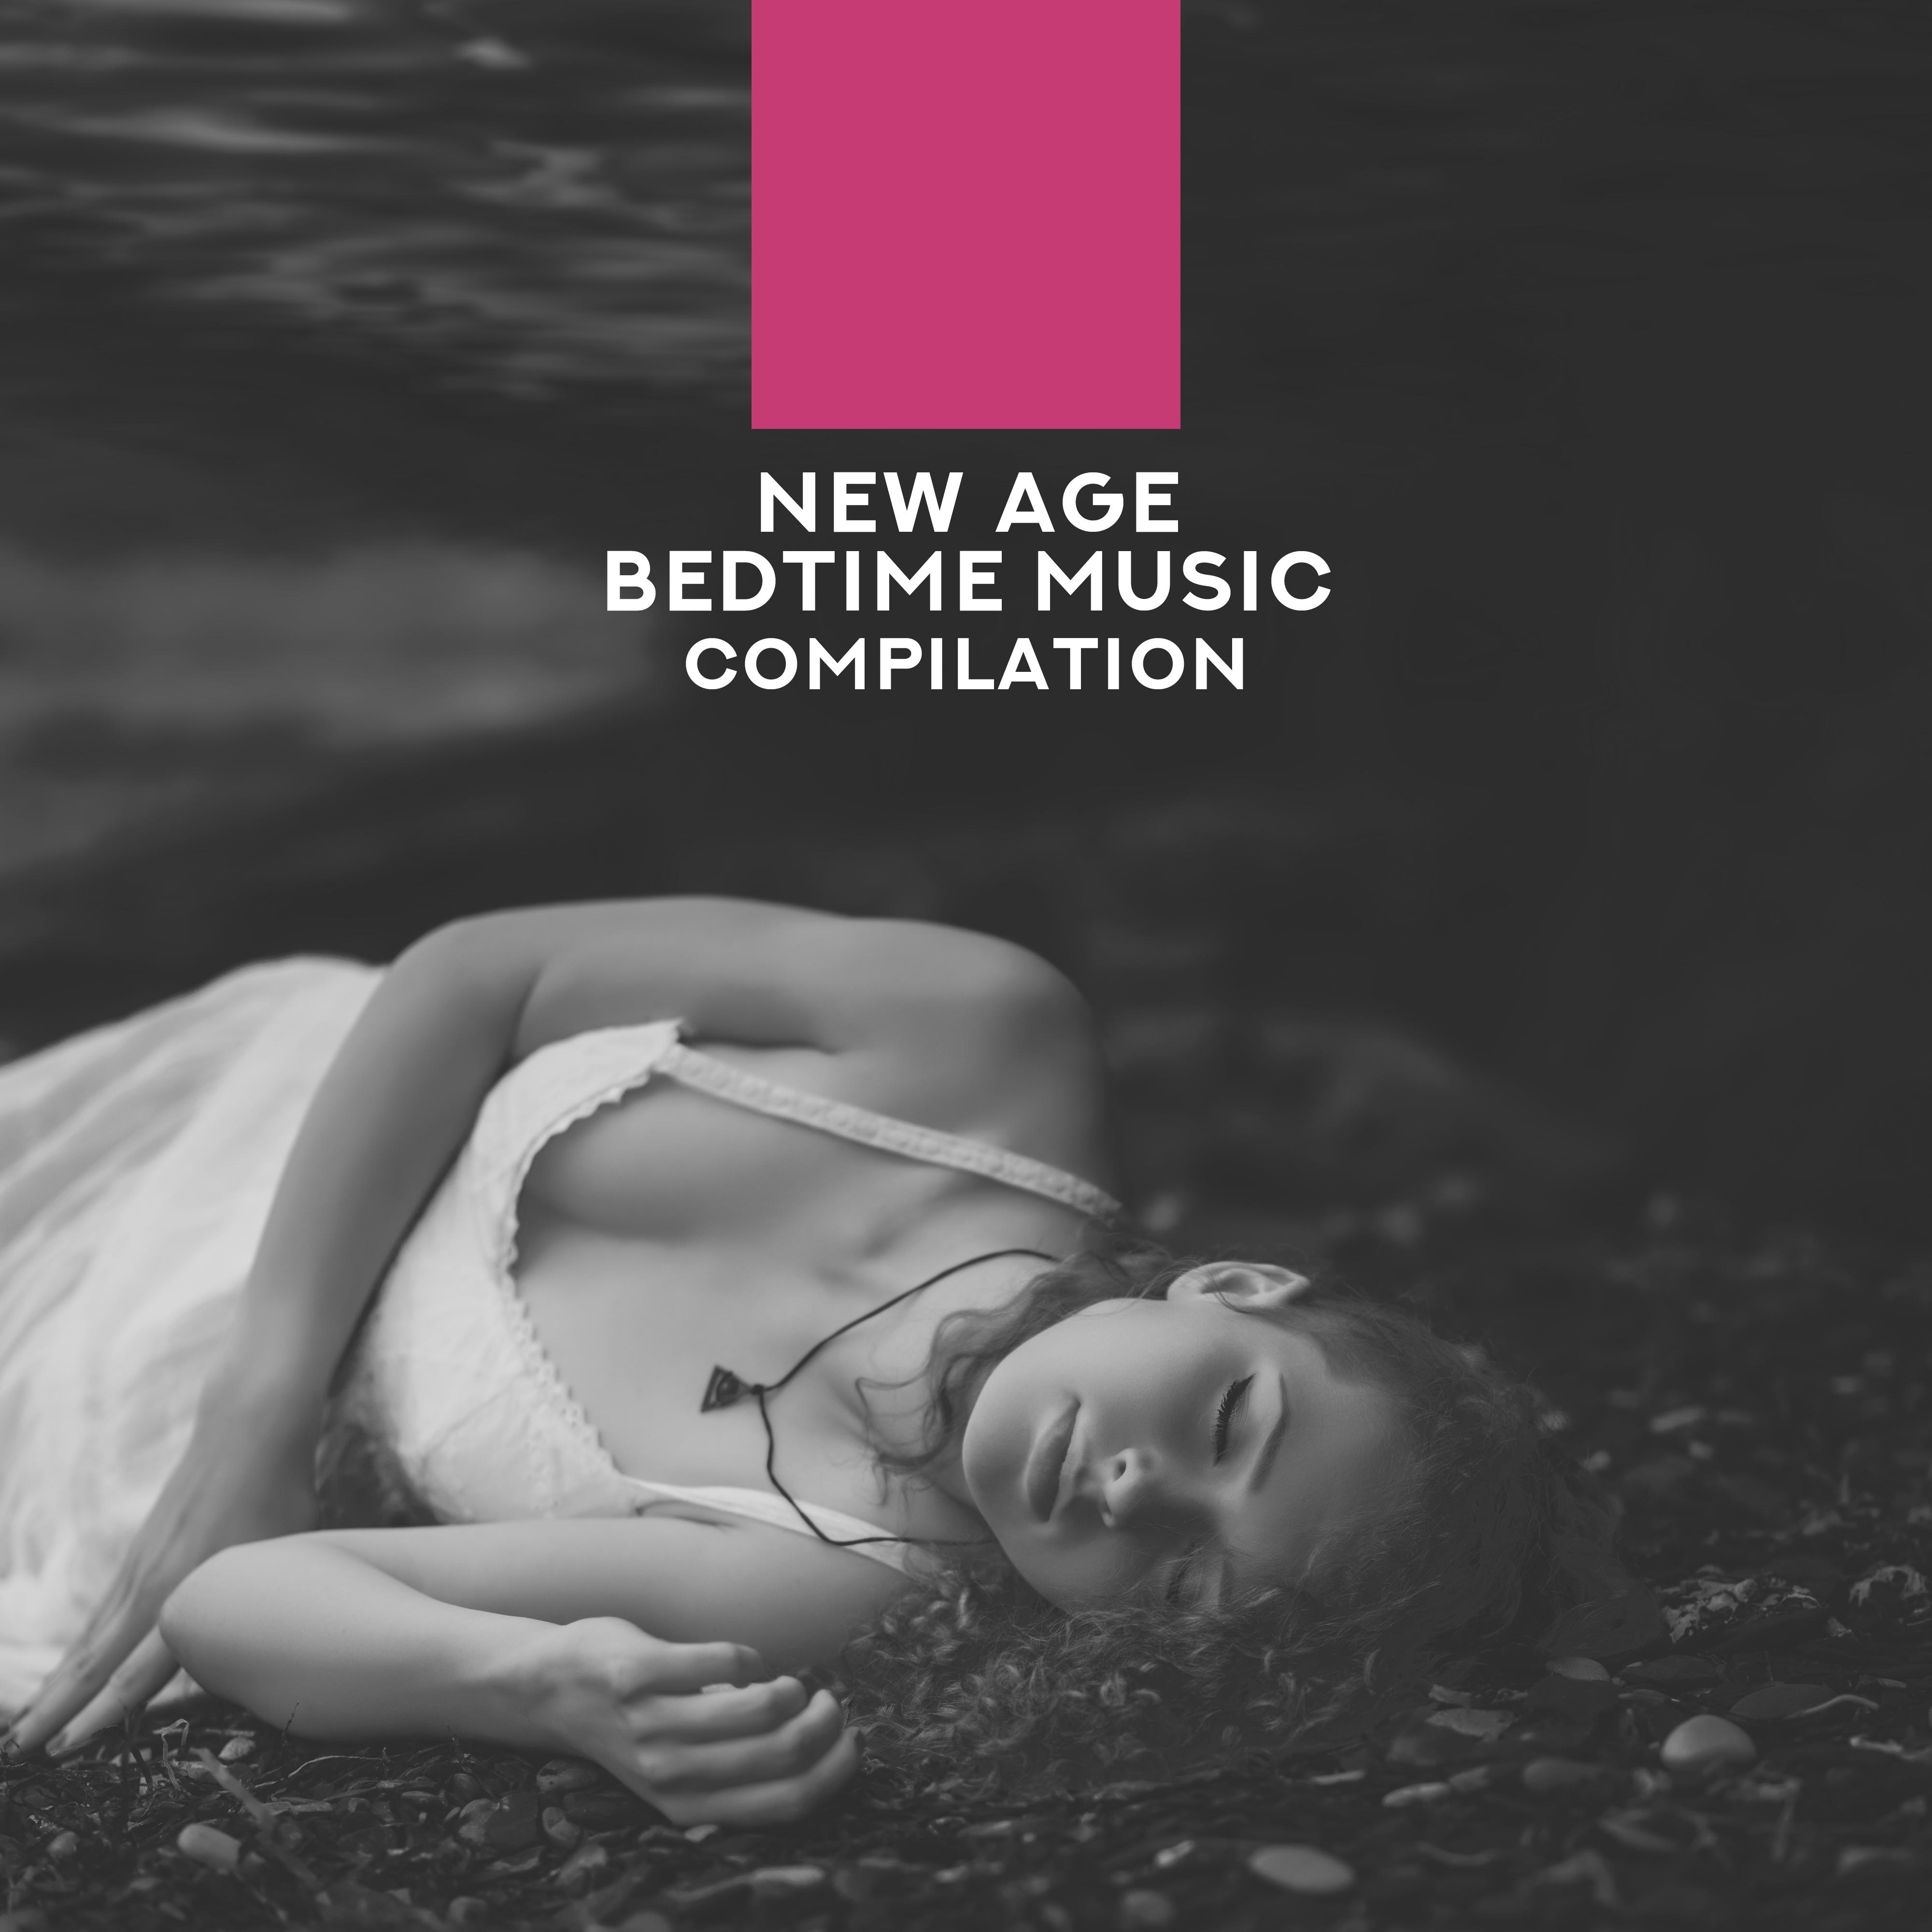 New Age Bedtime Music Compilation